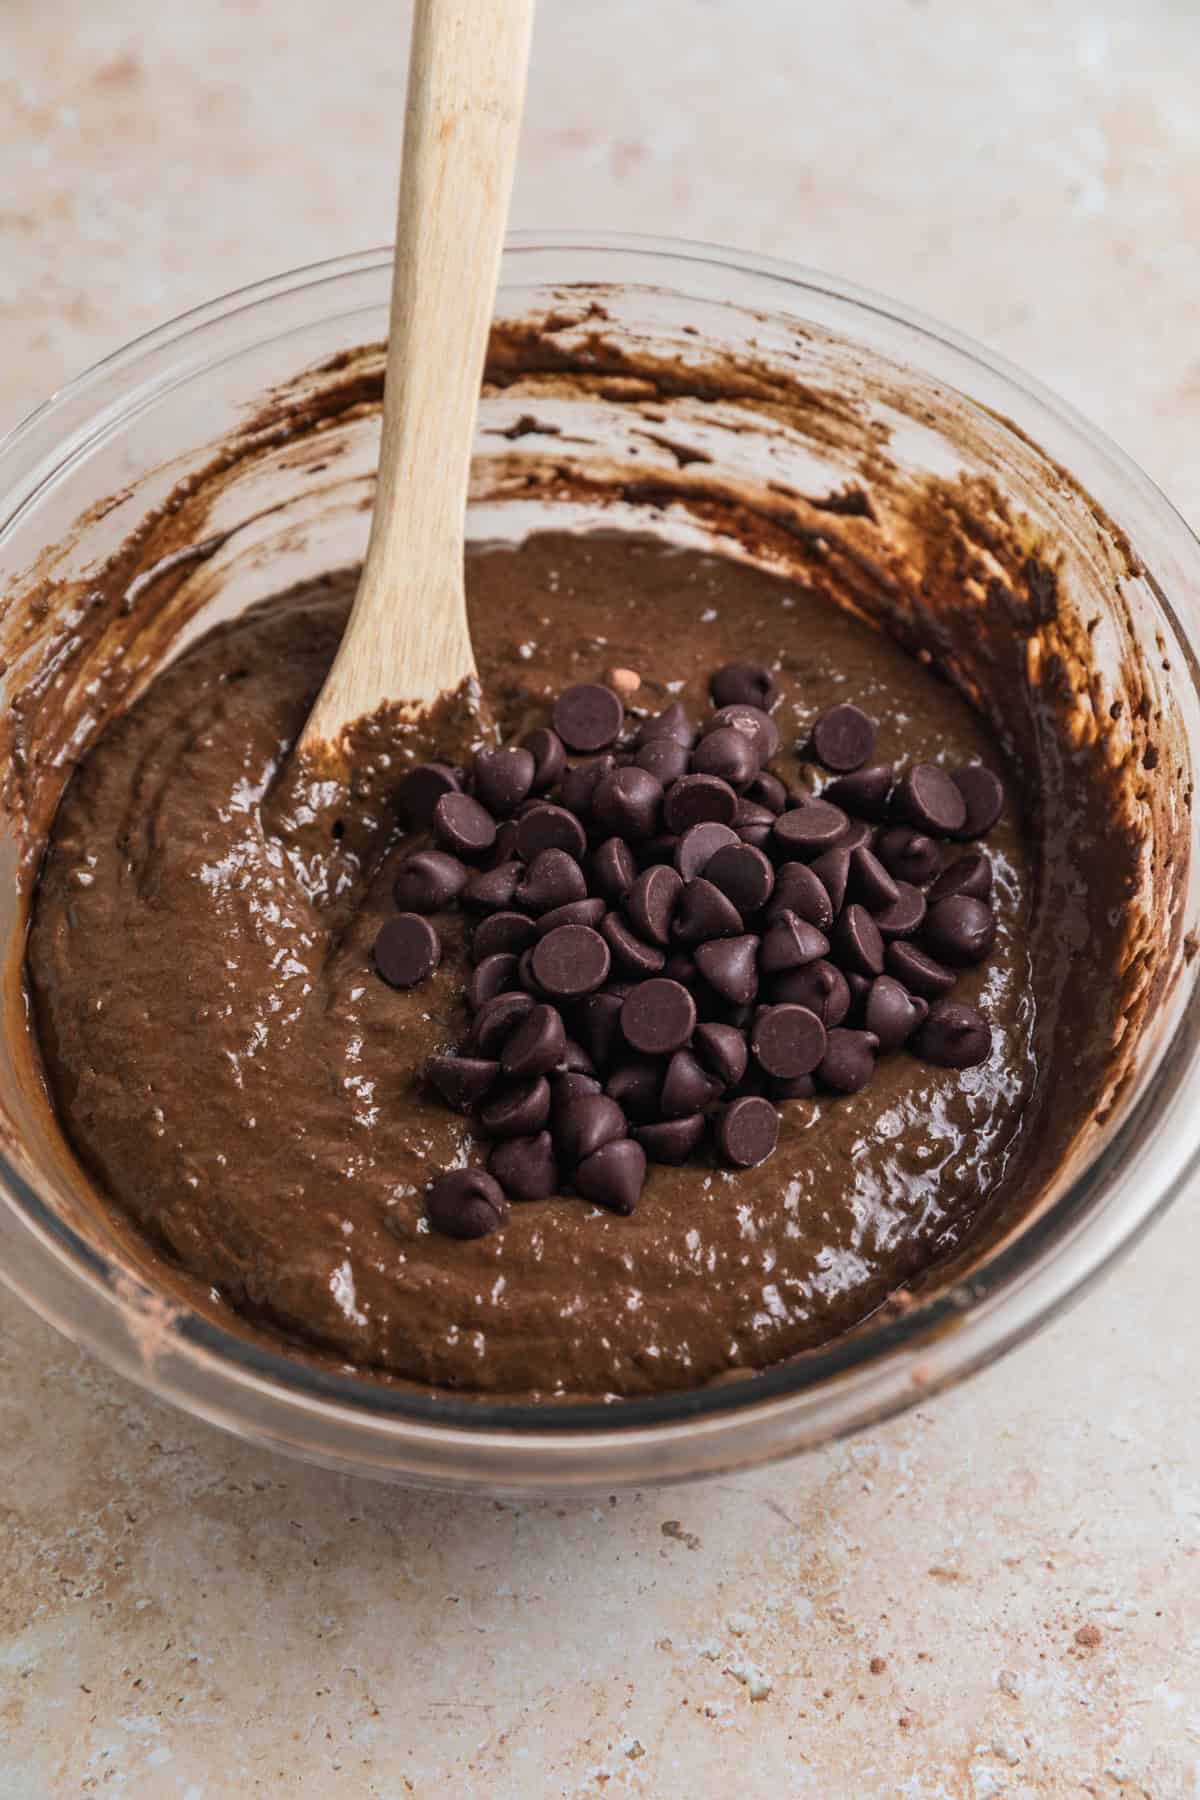 Chocolate chips added to chocolate spinach muffin mixture.